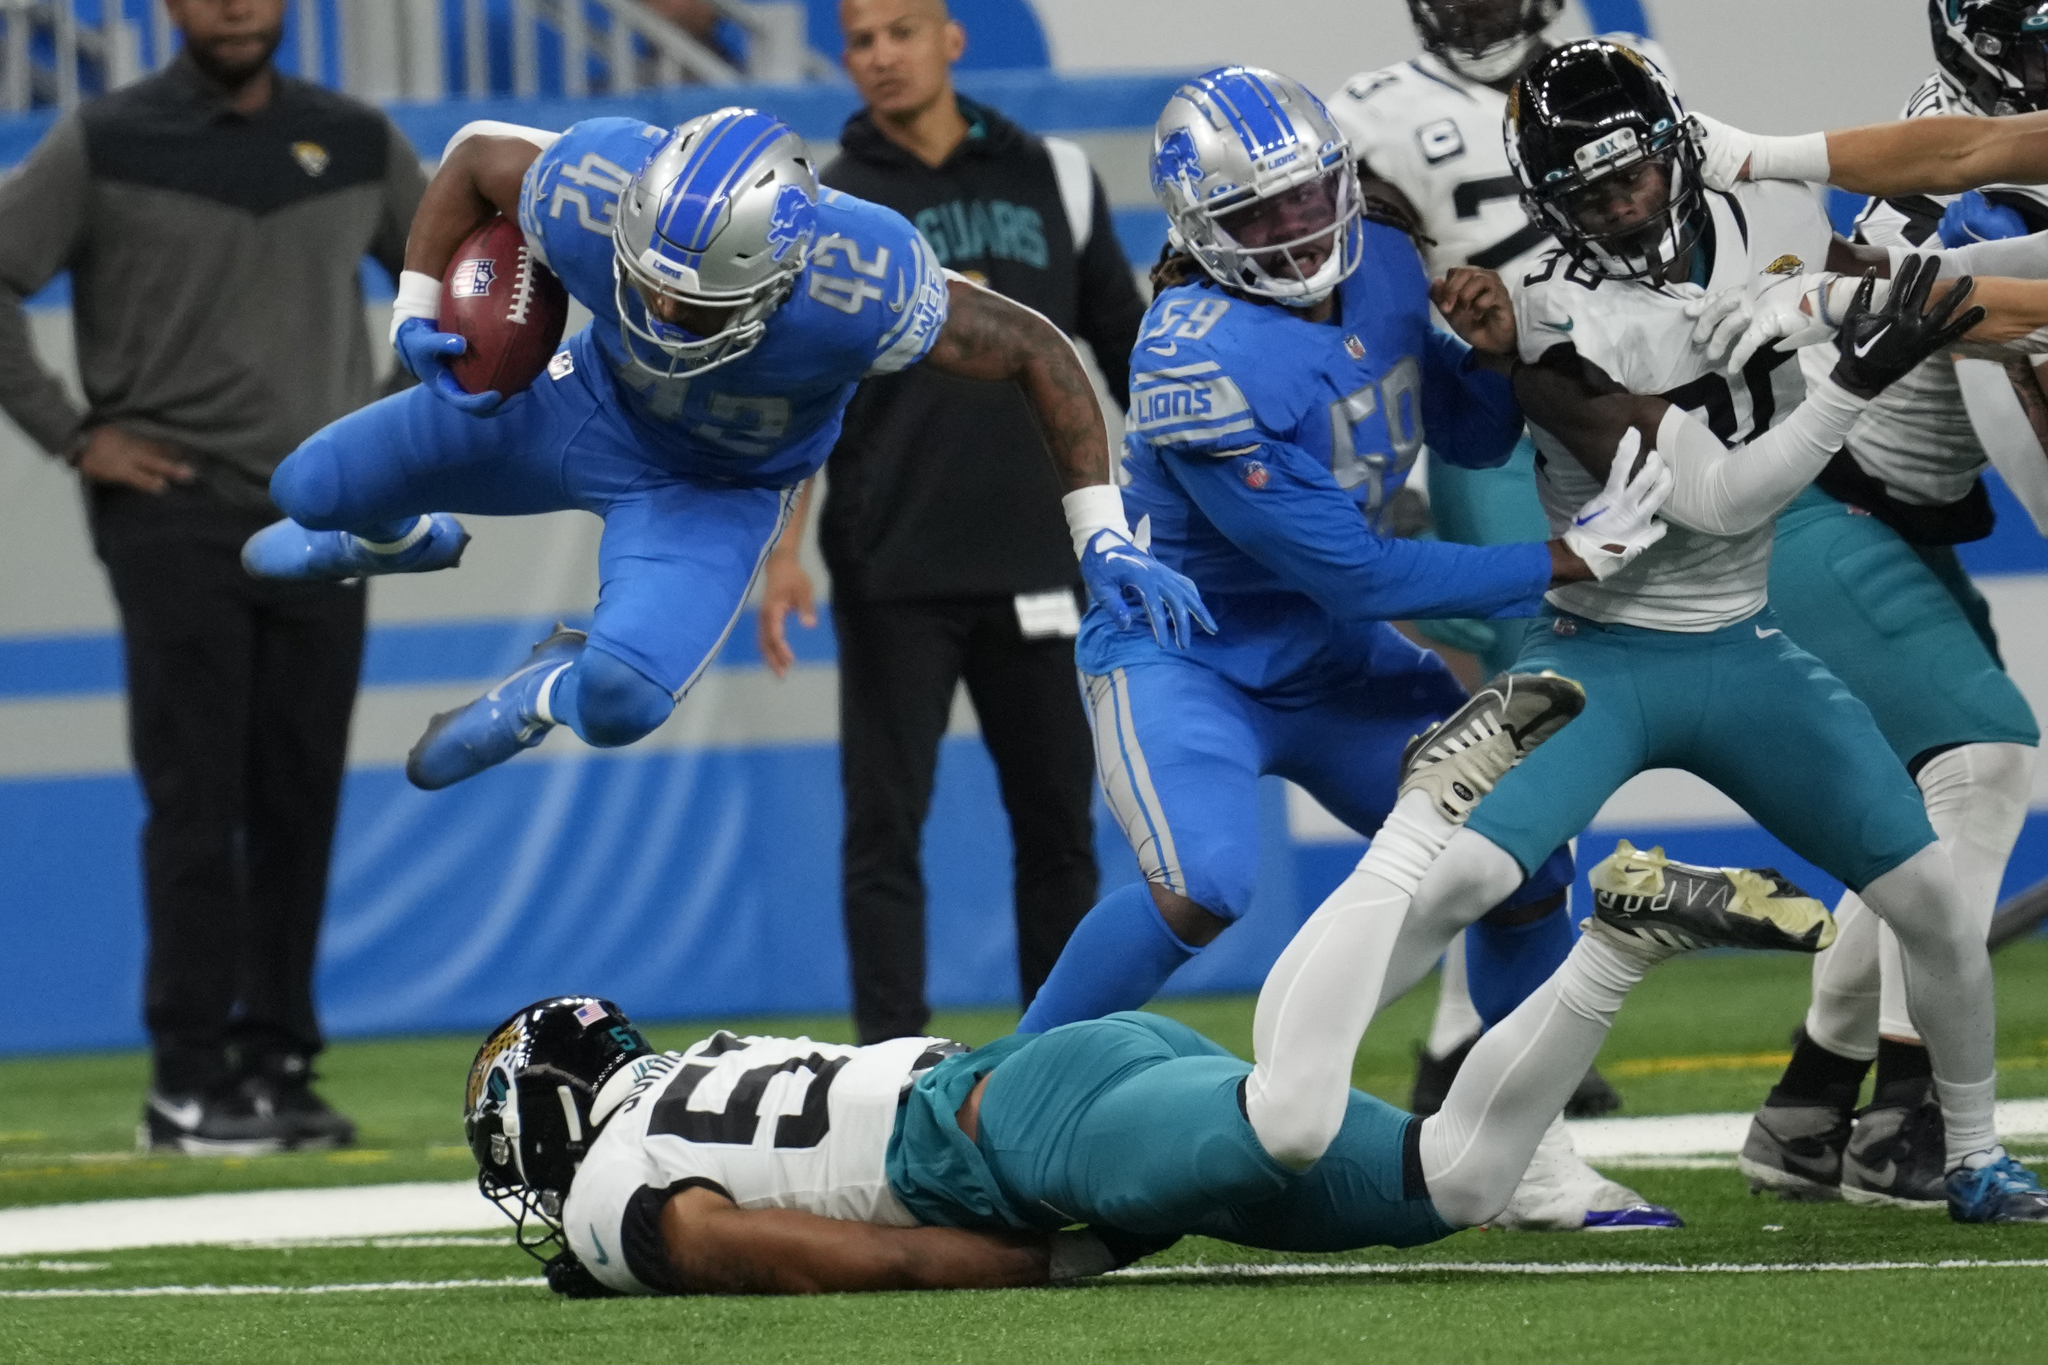 How to watch today's Jacksonville Jaguars vs. Detroit Lions NFL game